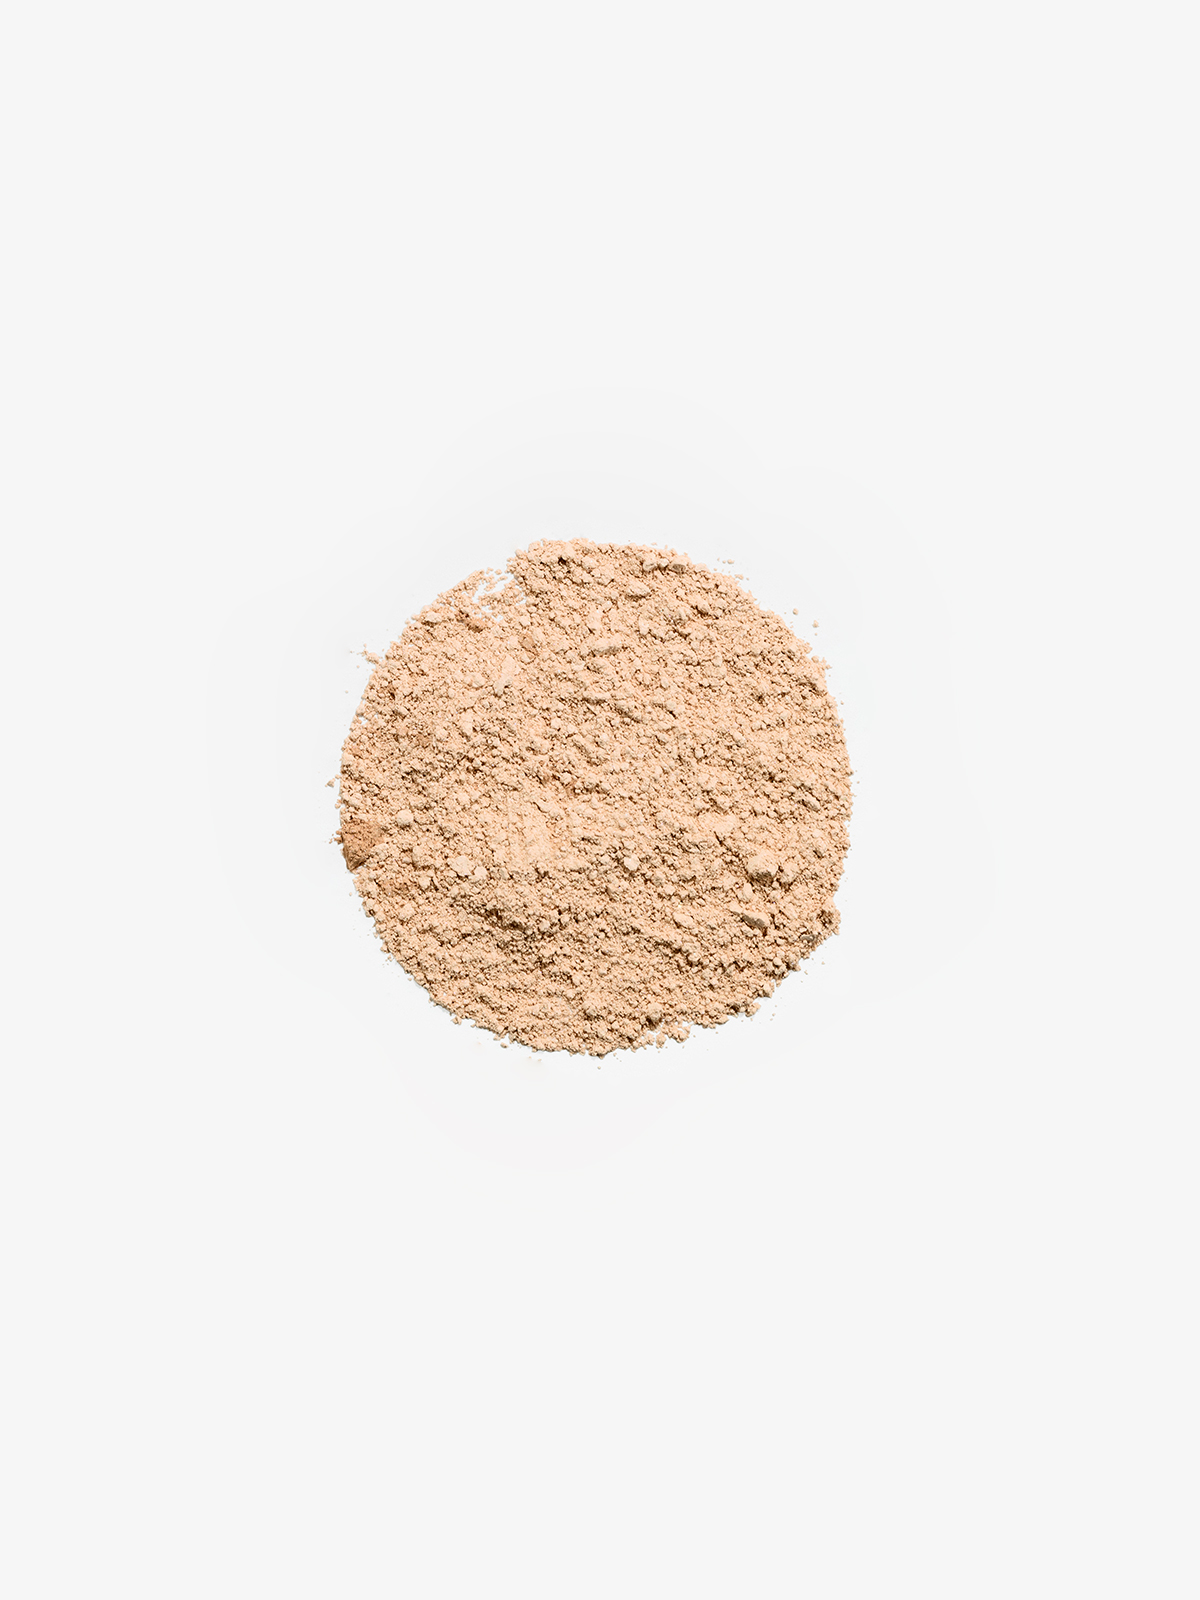 Mineral Foundation